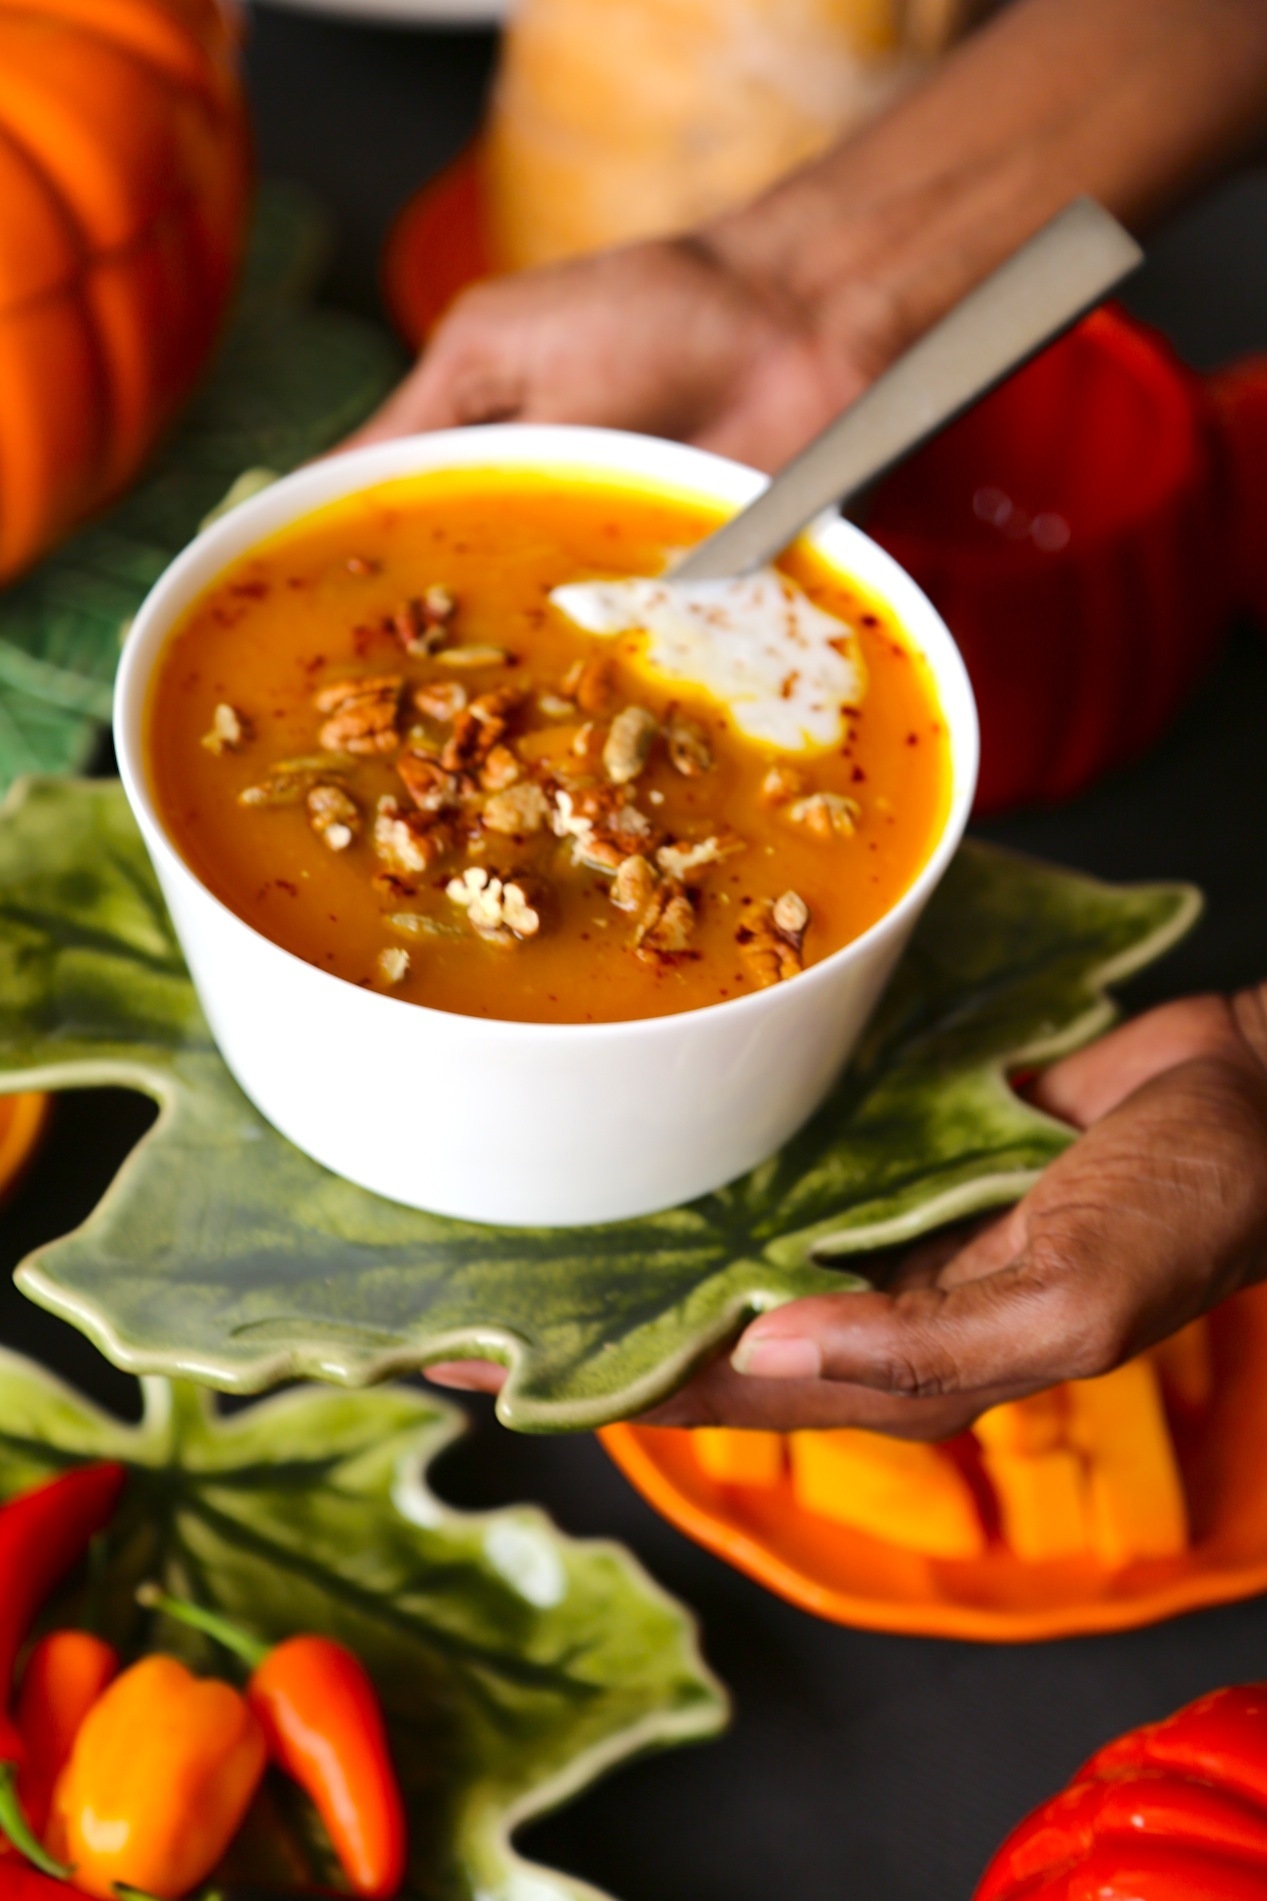 SPICY PUMPKIN SOUP WITH TOASTED PECANS AND PUMPKIN SEEDS